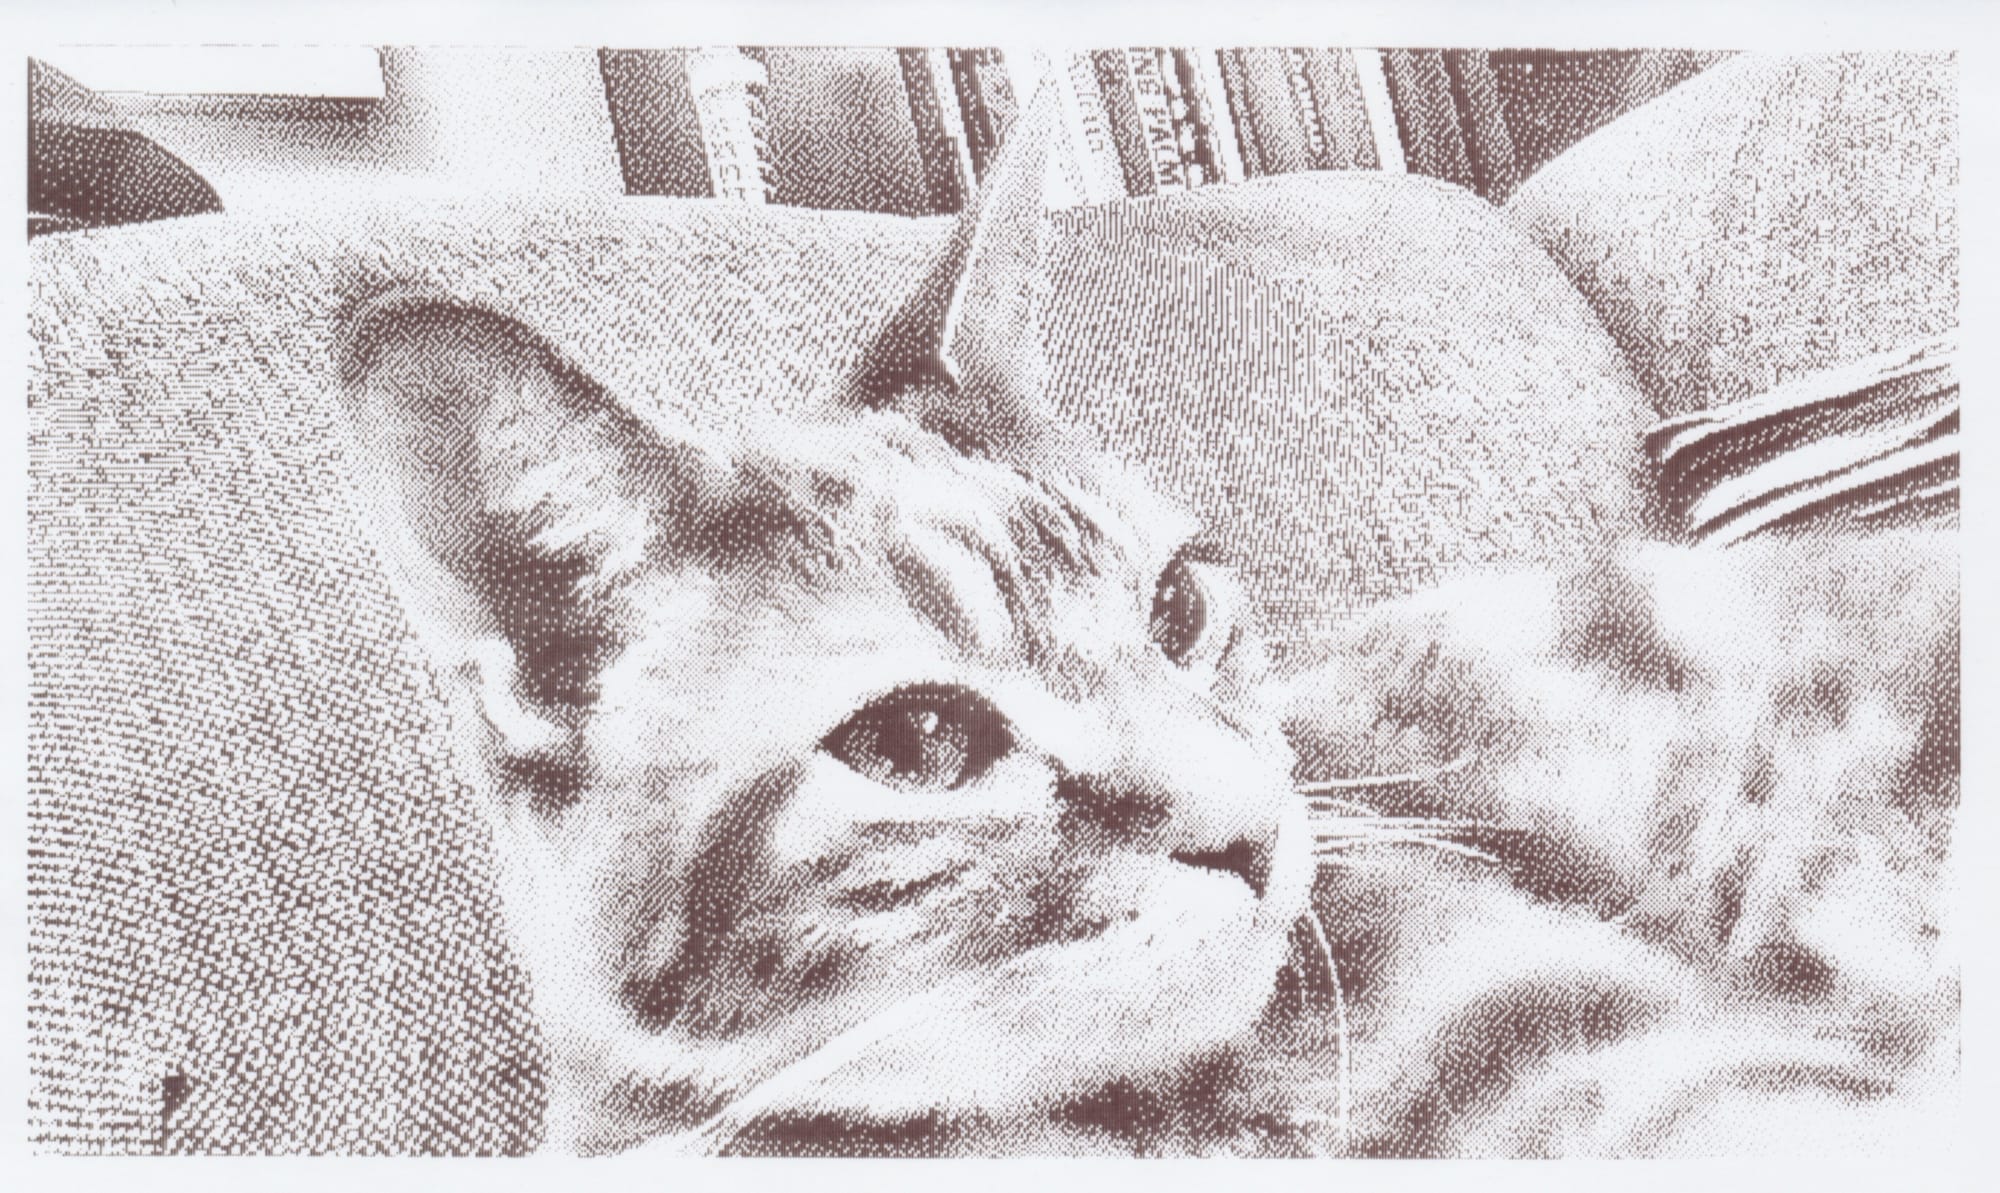 Another 1-bit grayscale thermal print out of a close-up side-view of a cat's face looking to the side of the camera